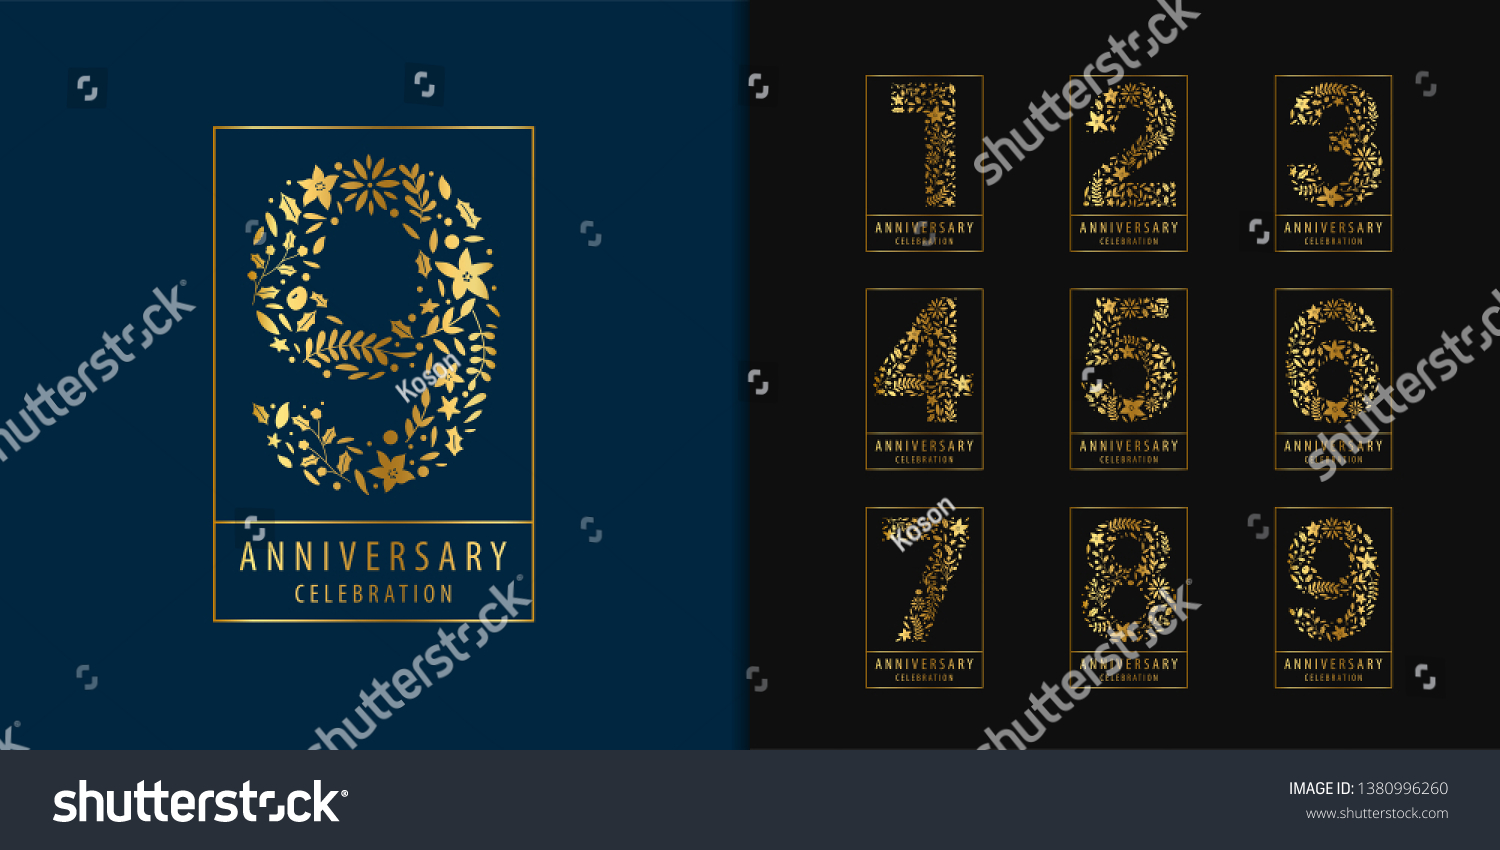 SVG of Set of anniversary logotype. Golden anniversary celebration with flower and leaves design for company profile, leaflet, magazine, brochure, invitation or greeting card. Vector illustration. svg